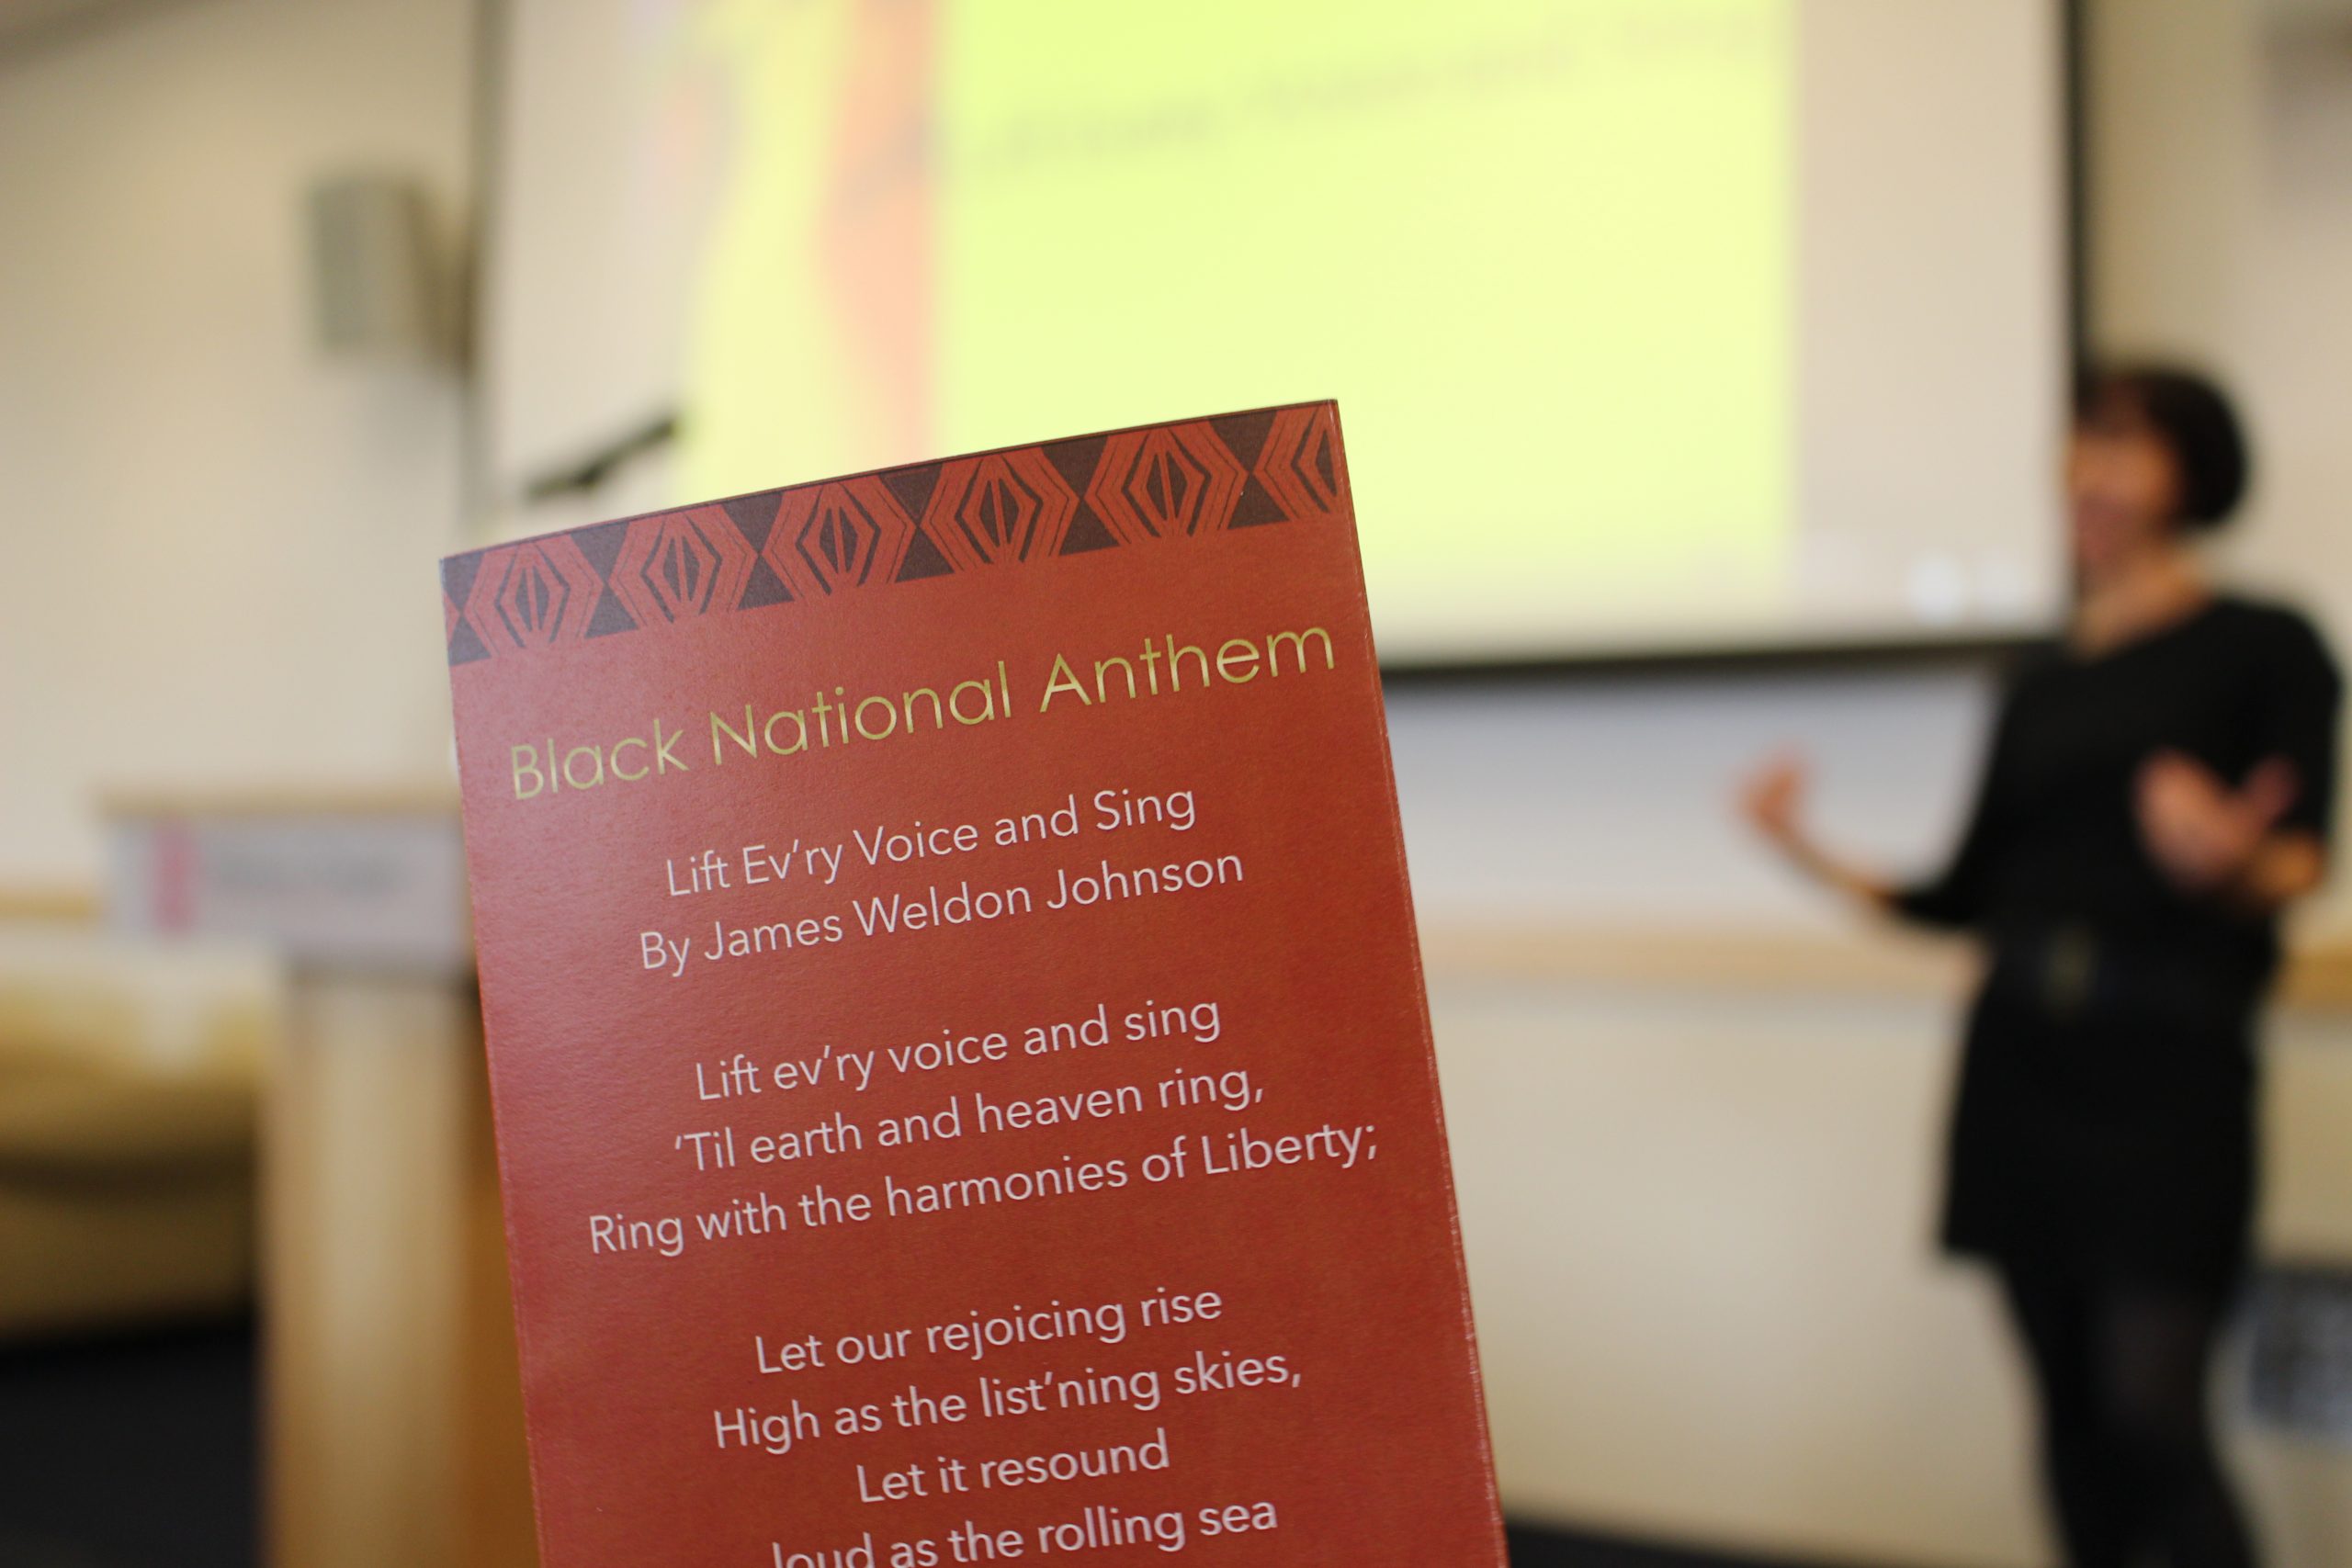 A photo of a pamphlet with the Black National Anthem.